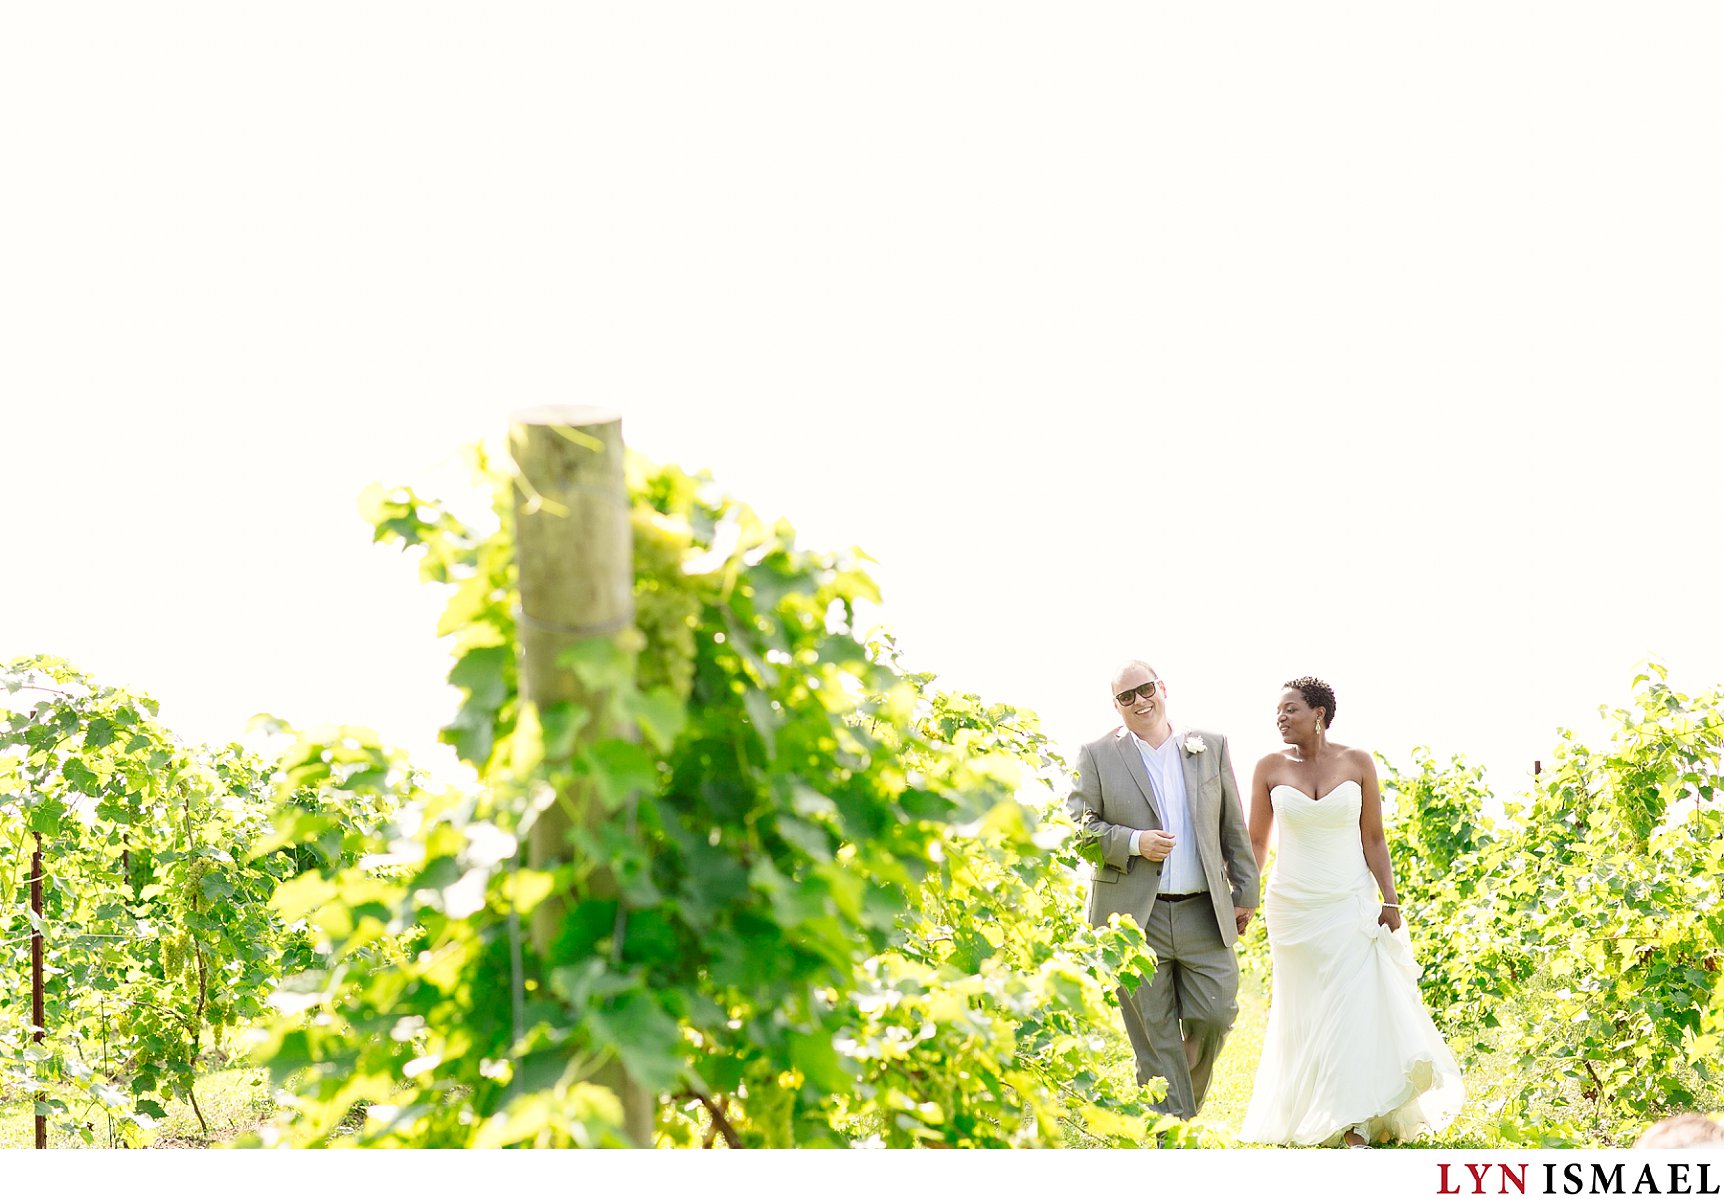 A bride and groom stroll down the vineyards at the Holland Marsh Wineries in Newmarket before their wedding.